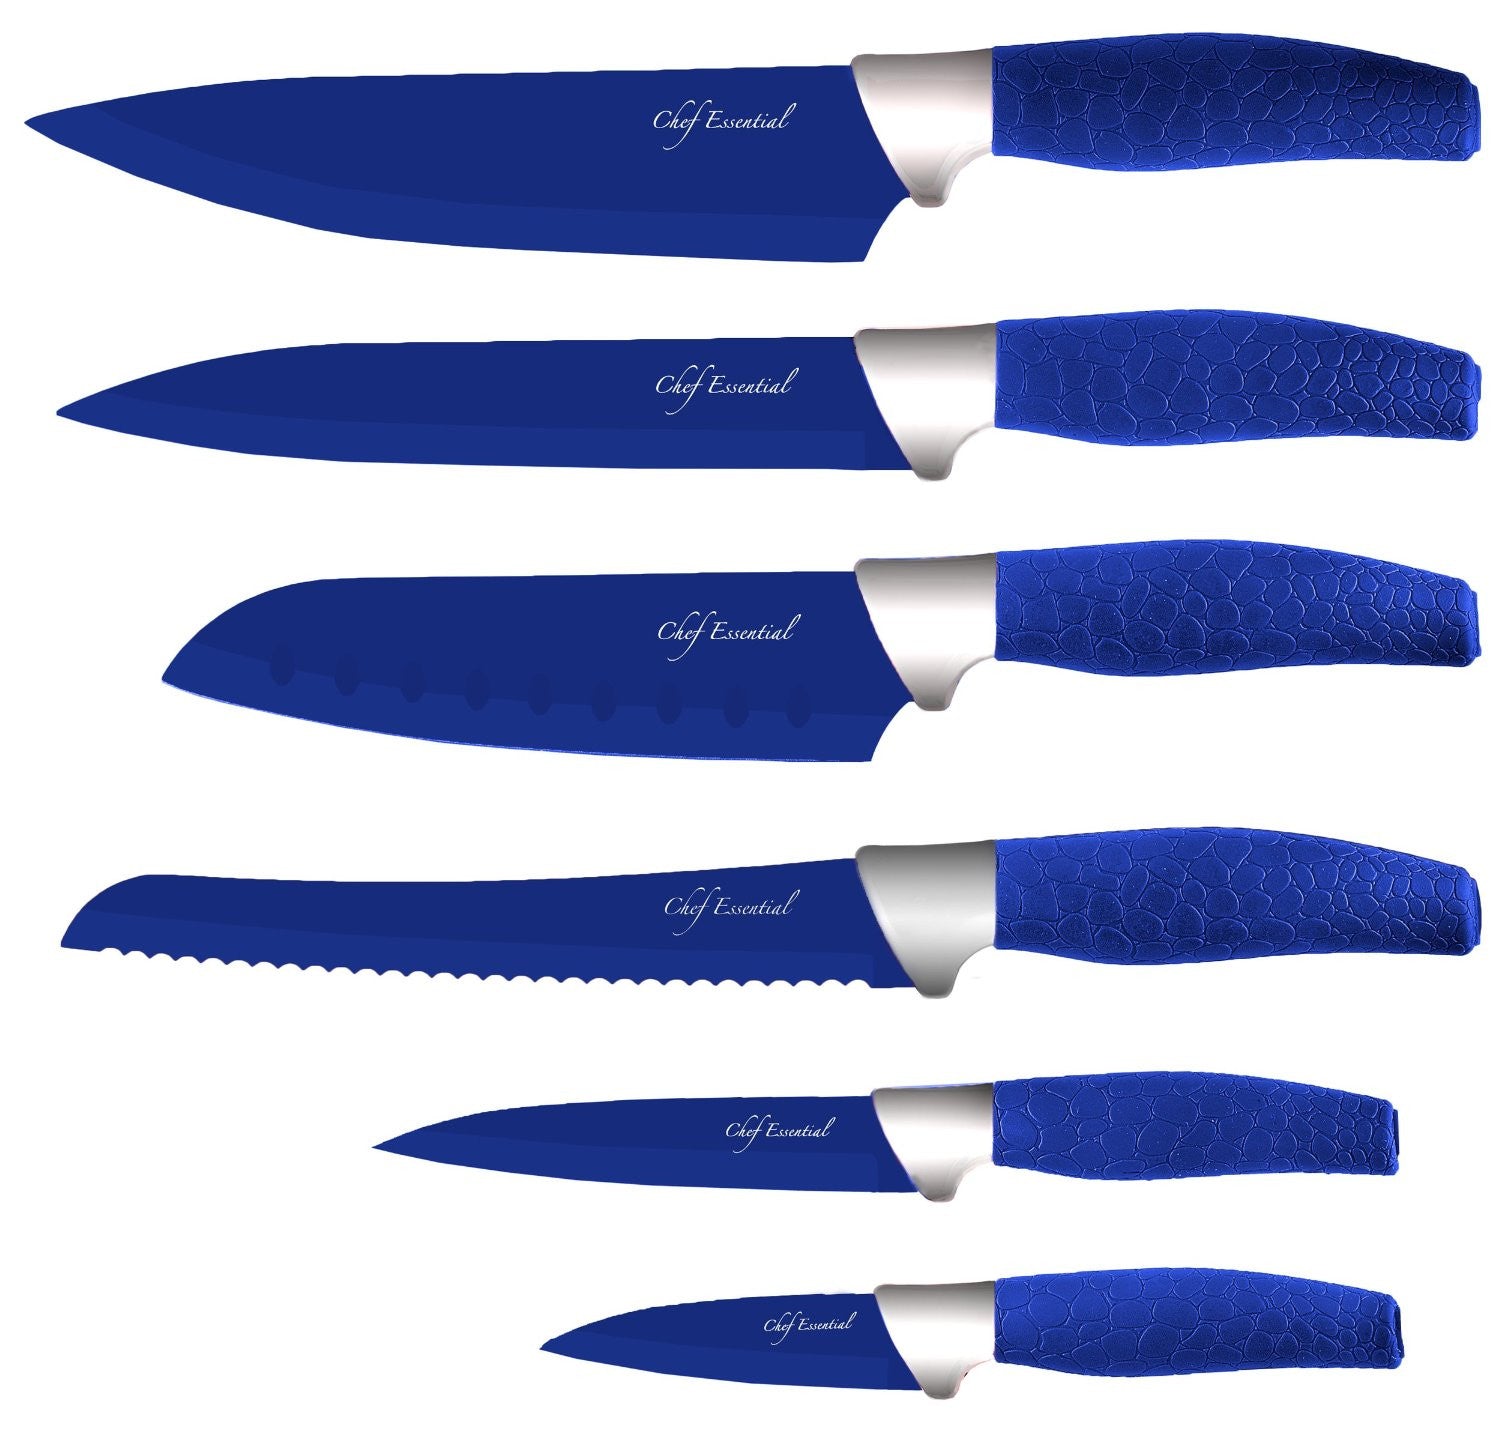 Chef Maeve 7 Piece Knife Set in Green – Chef's Kiss At Home